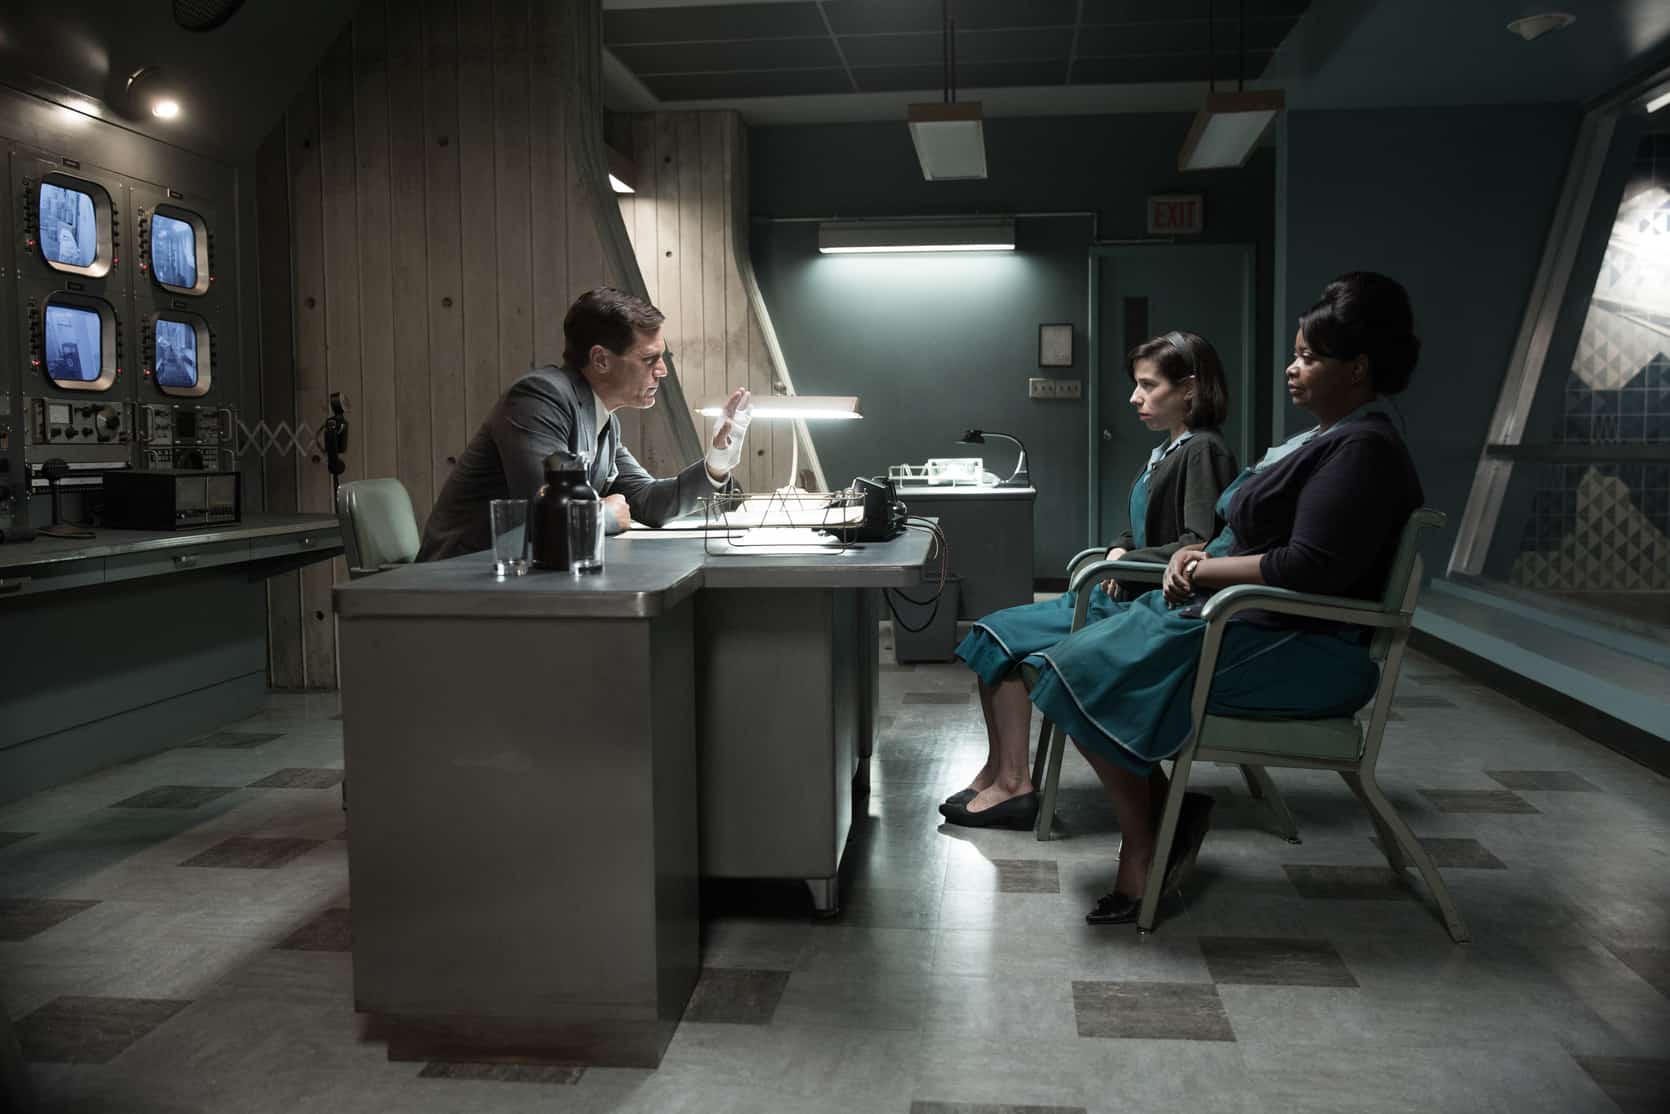 A man talks to two women in a retro-future office in this photo from Searchlight Pictures.